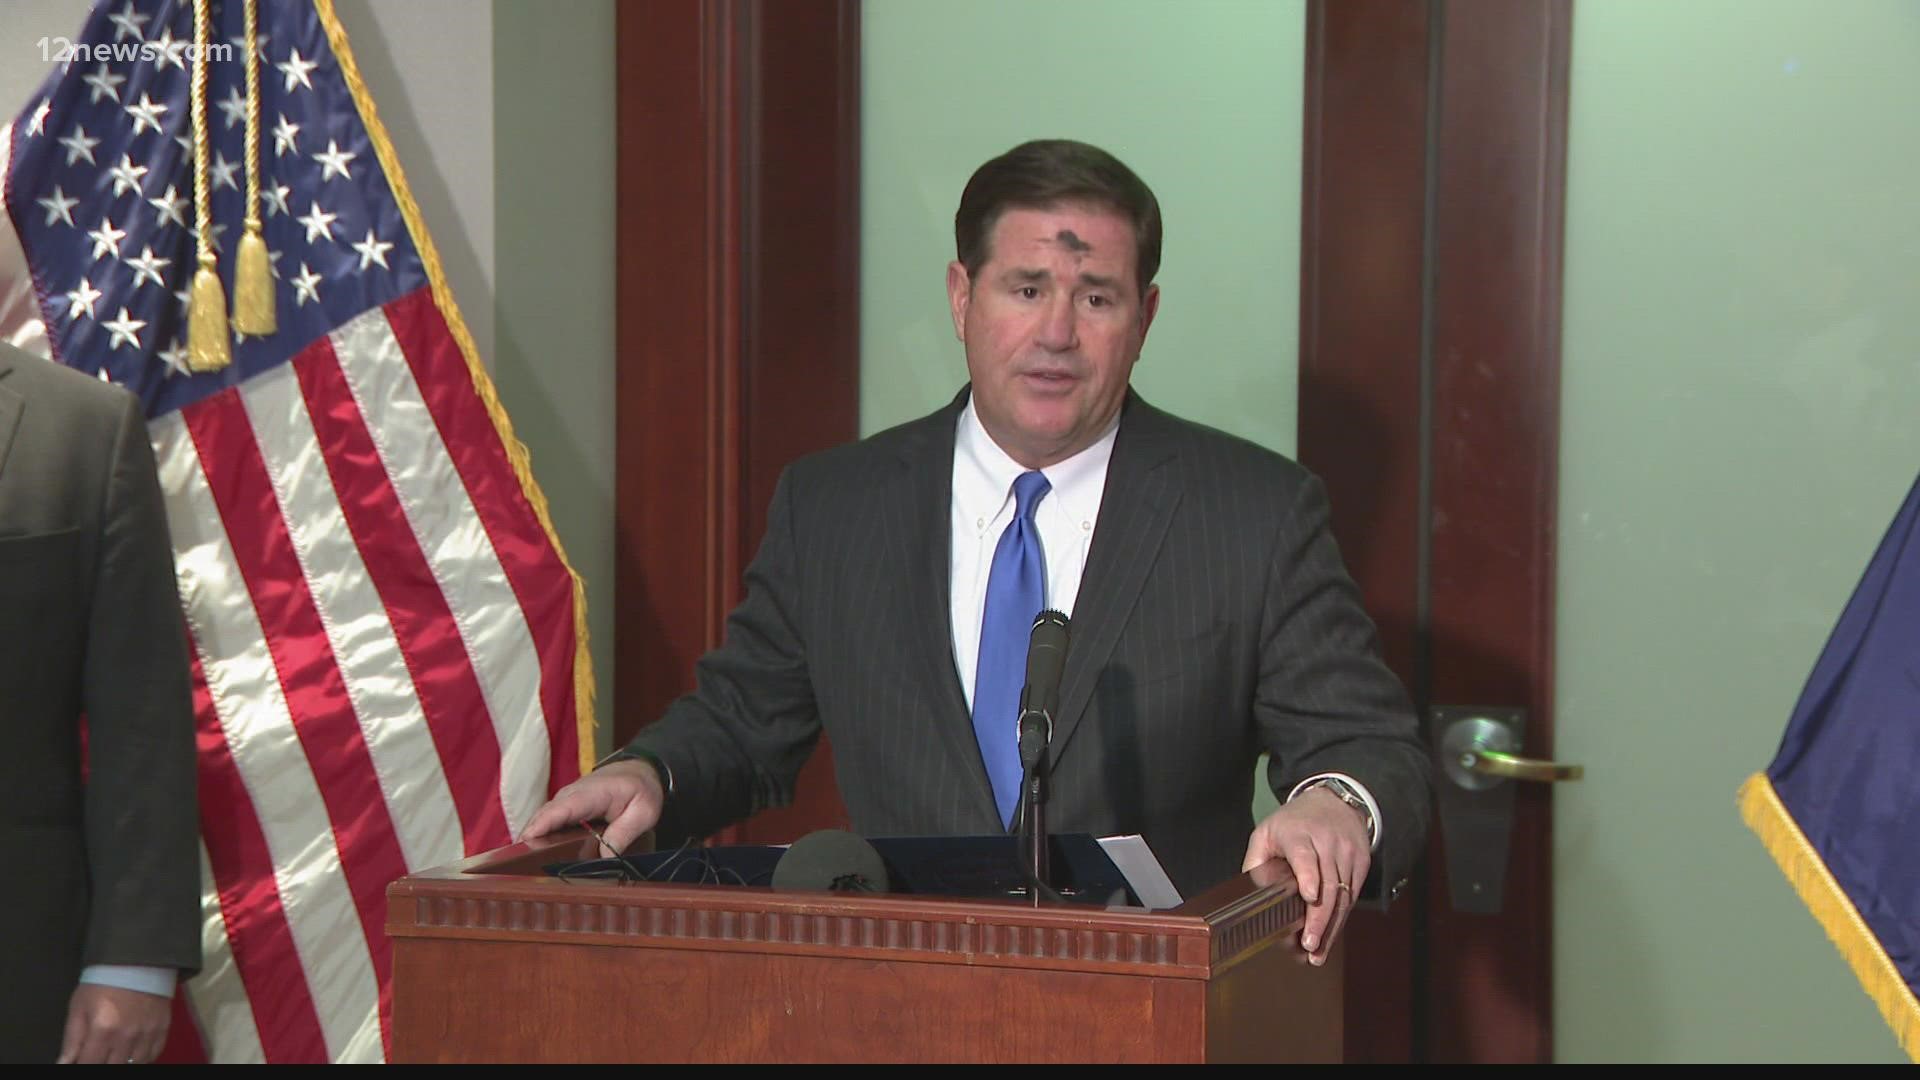 Governor Ducey announced he is investing $100 million to launch a summer camp intended to help students recover from the learning loss experience during the pandemic